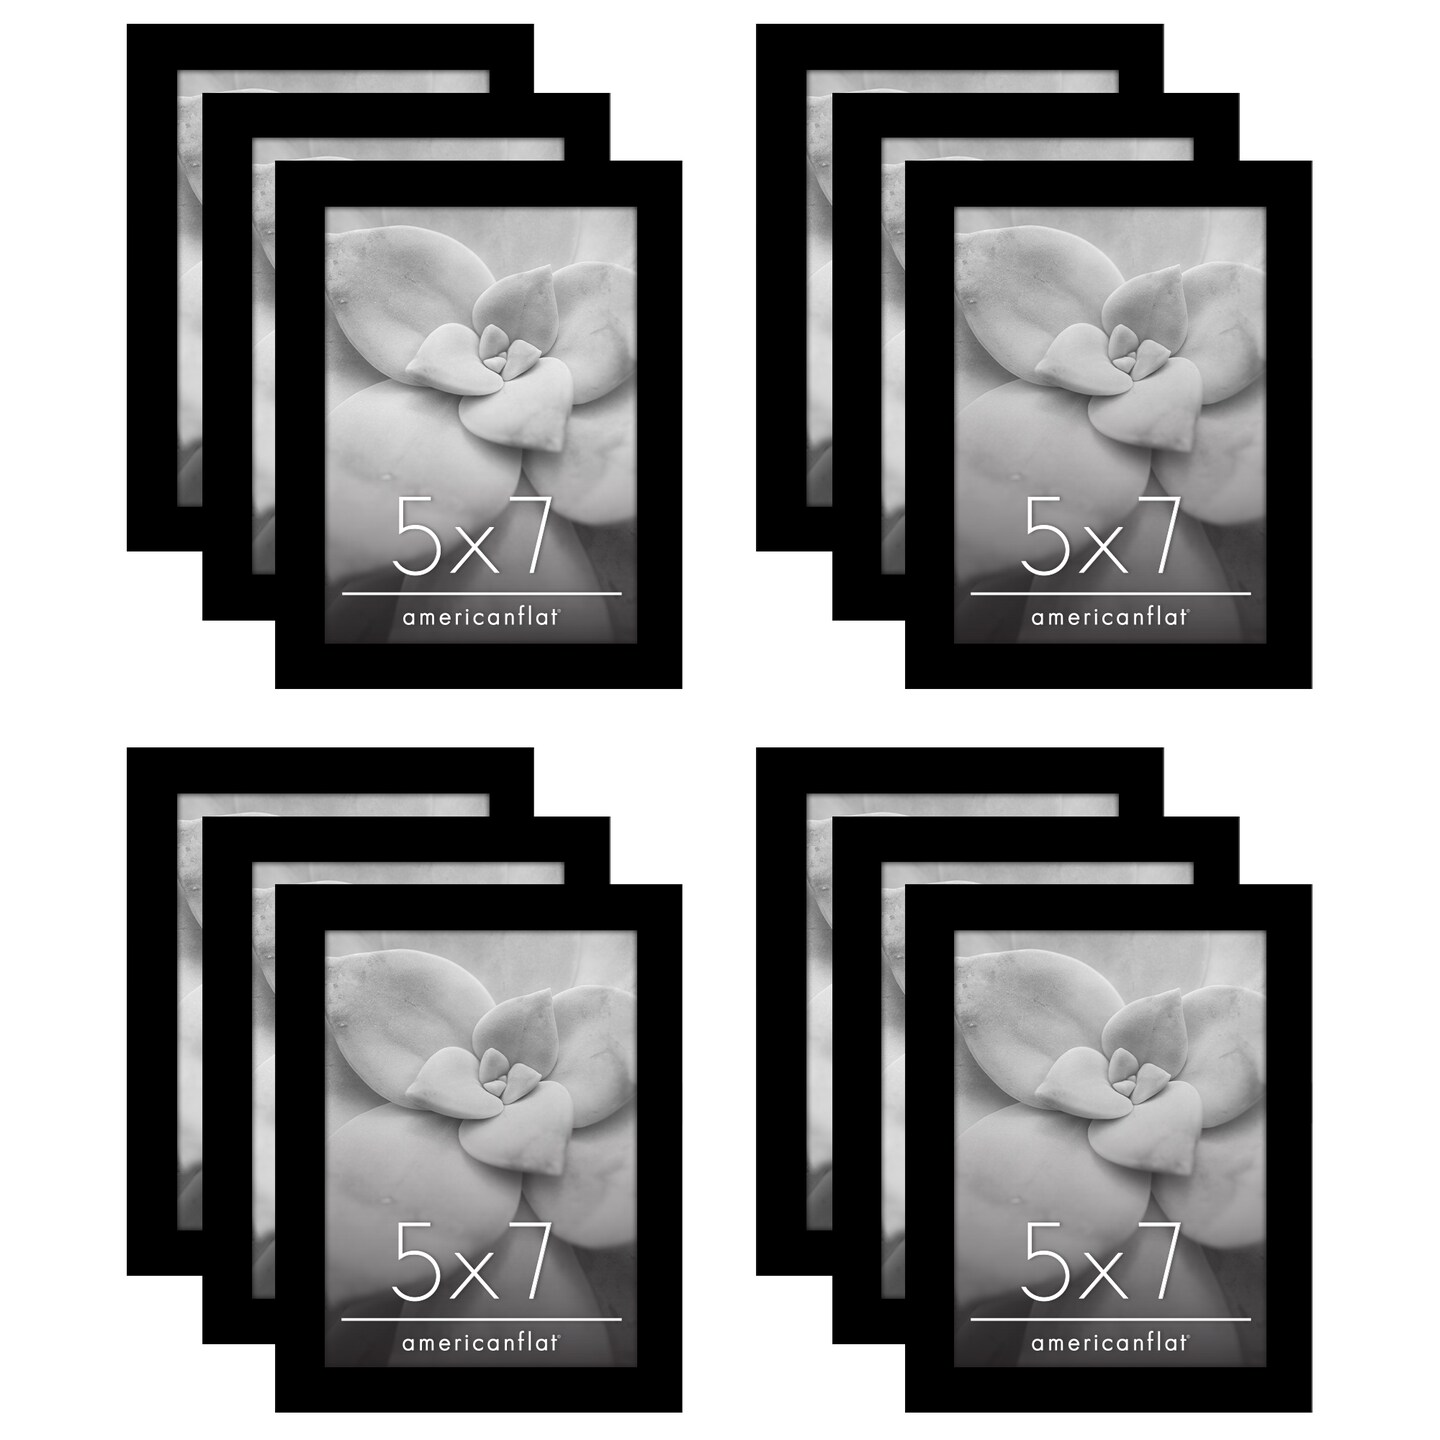 Americanflat Gallery Wall Picture Frames - Set of 12 - Picture Frame Set for Wall Collage - Plexiglass Cover - Hanging Hardware - Includes Easel